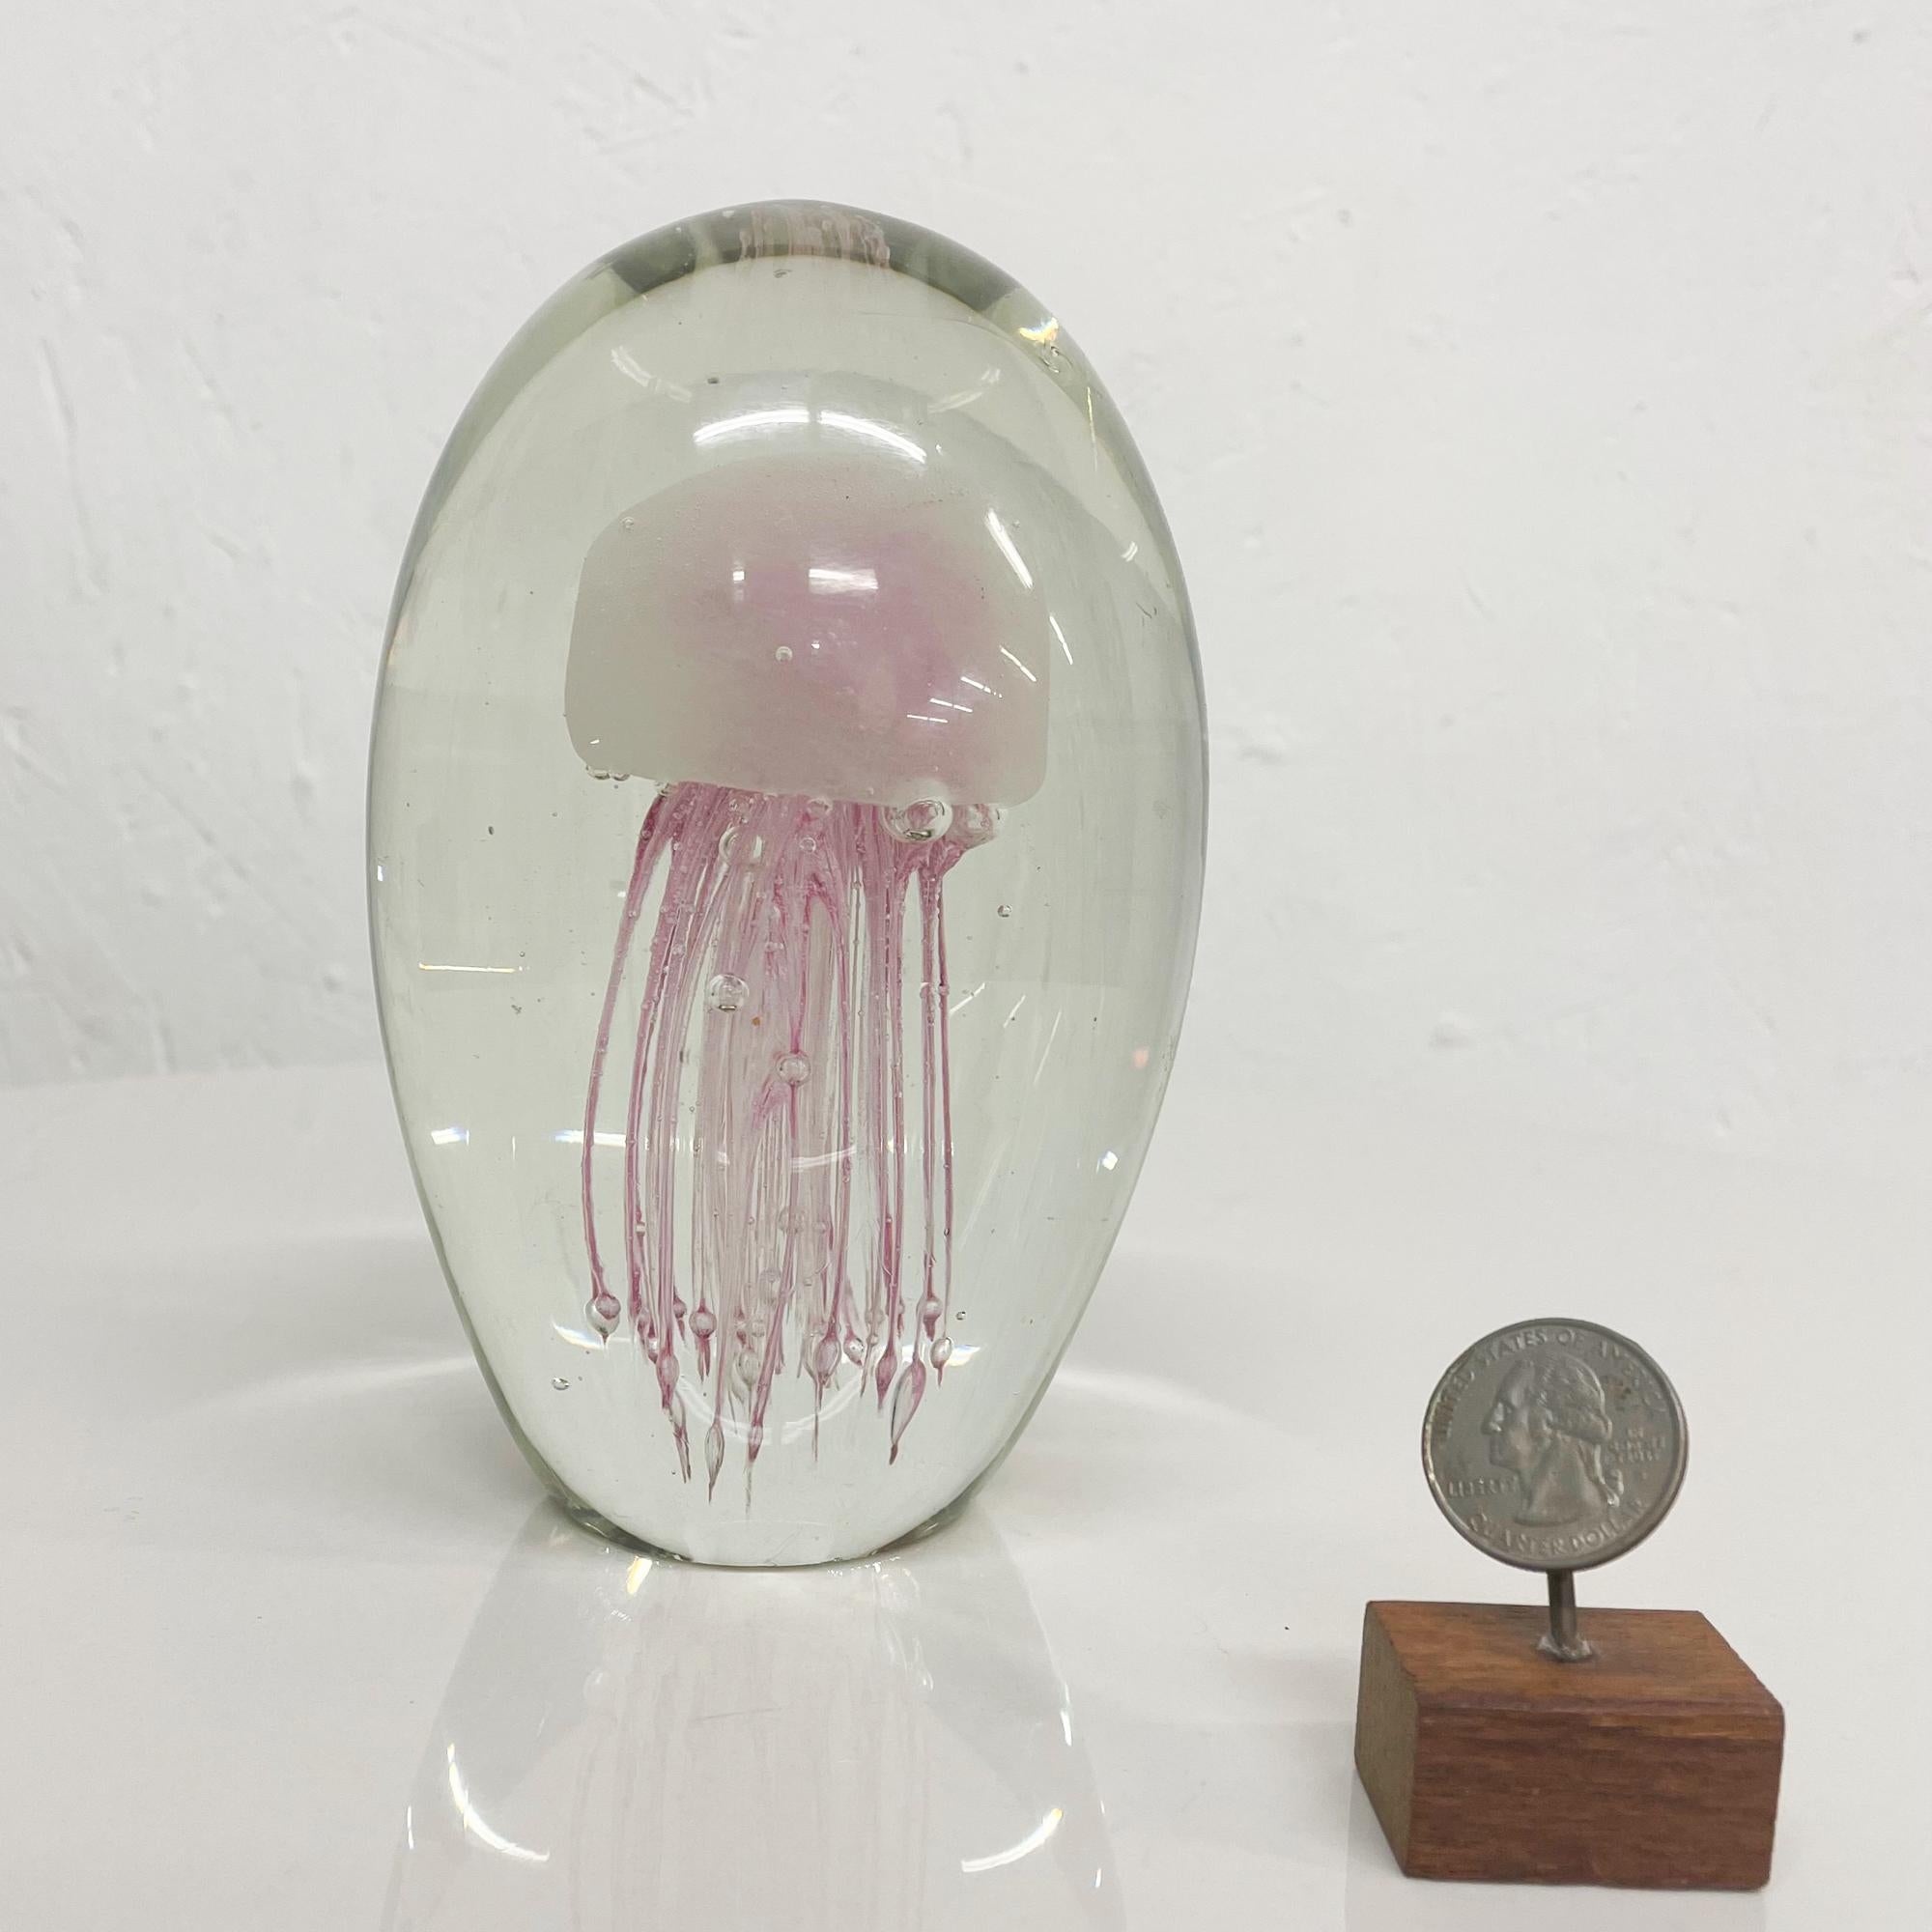 Paperweight
Pretty Sea Life Sculpture Glass Jellyfish Paperweight in Pink
Clear glass with PINK. Controlled bubble design. Not signed. 
In the style of venetian Murano Glass Art work.
Vintage condition with wear. Noted few dings on top surface